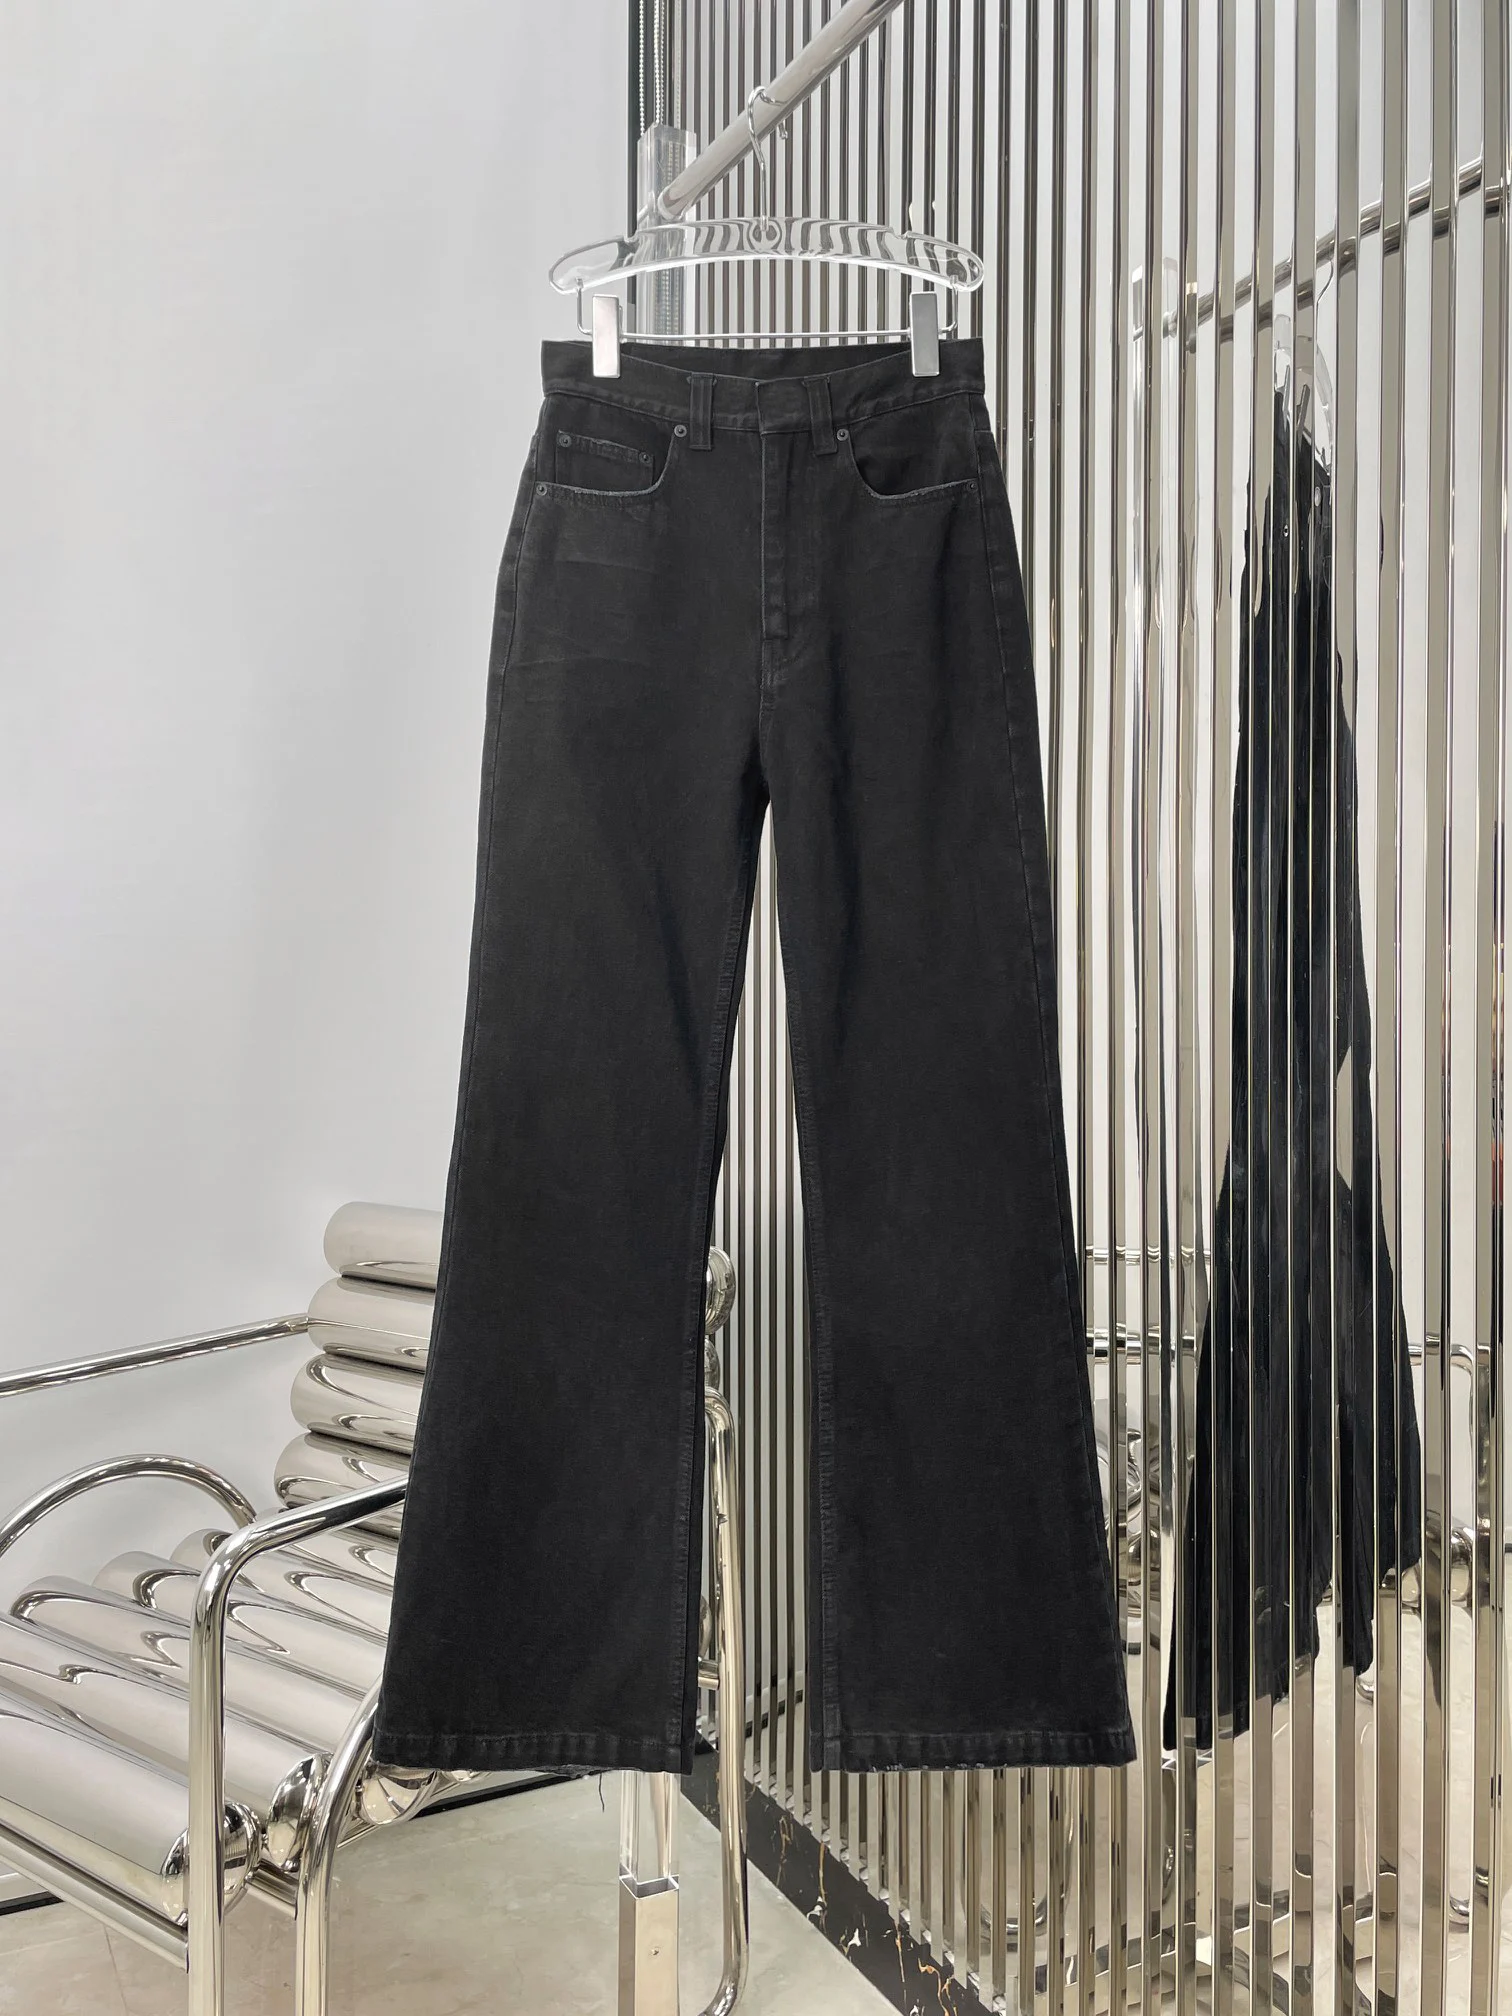 New female niche fashion trouser leg ripped carbon black to do old high waist flared jeans